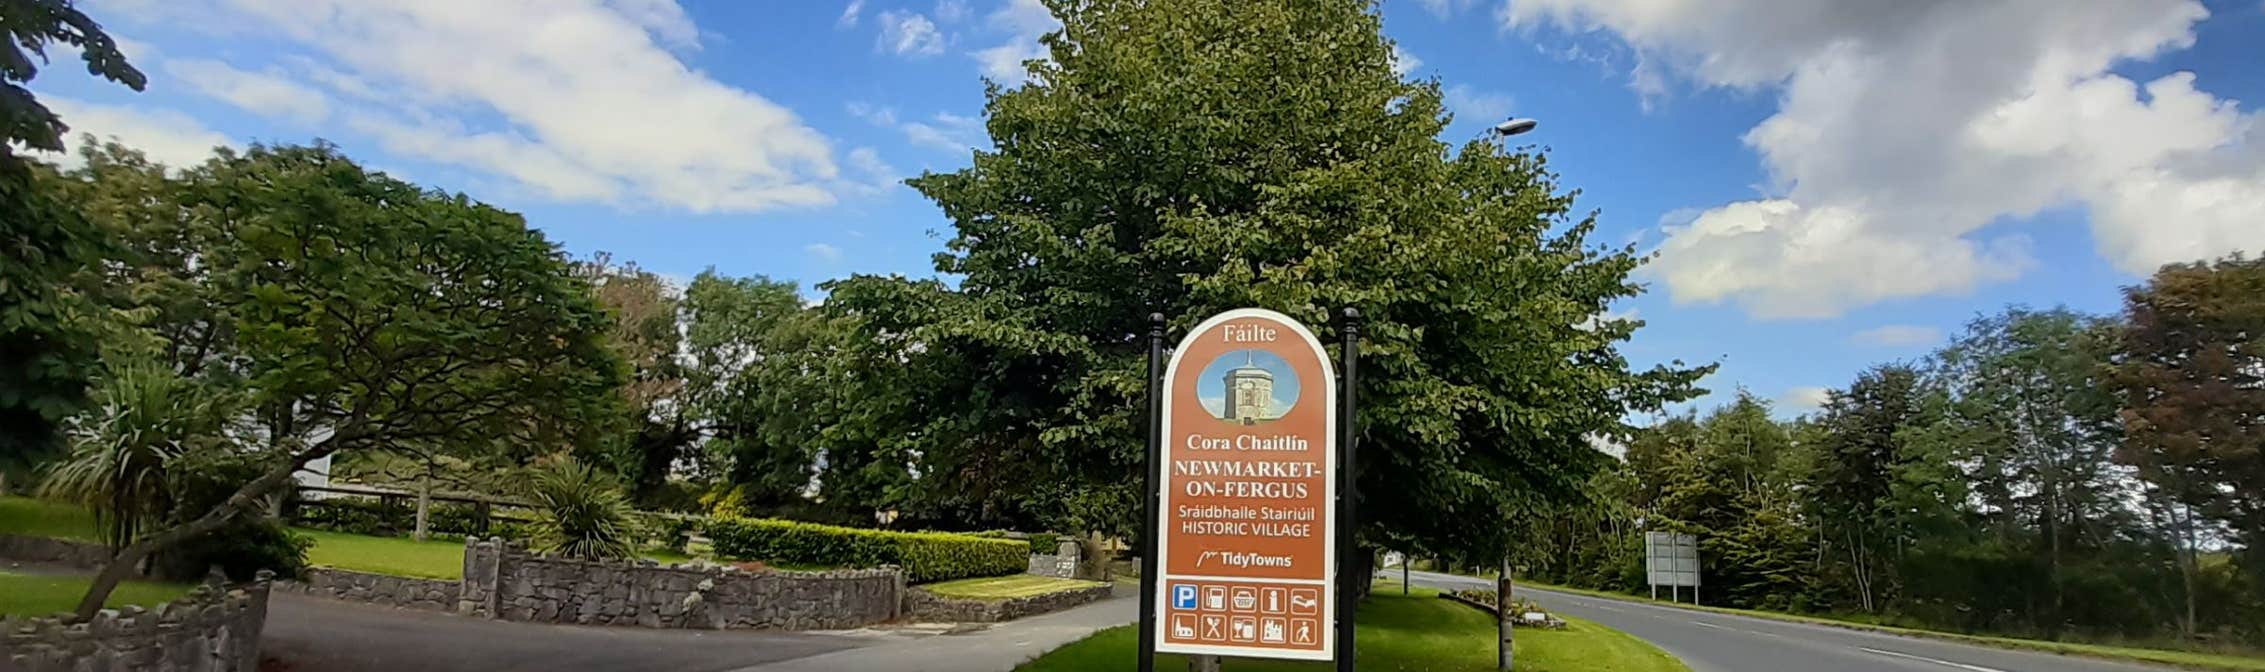 Image of a sign in Newmarket on Fergus in County Clare